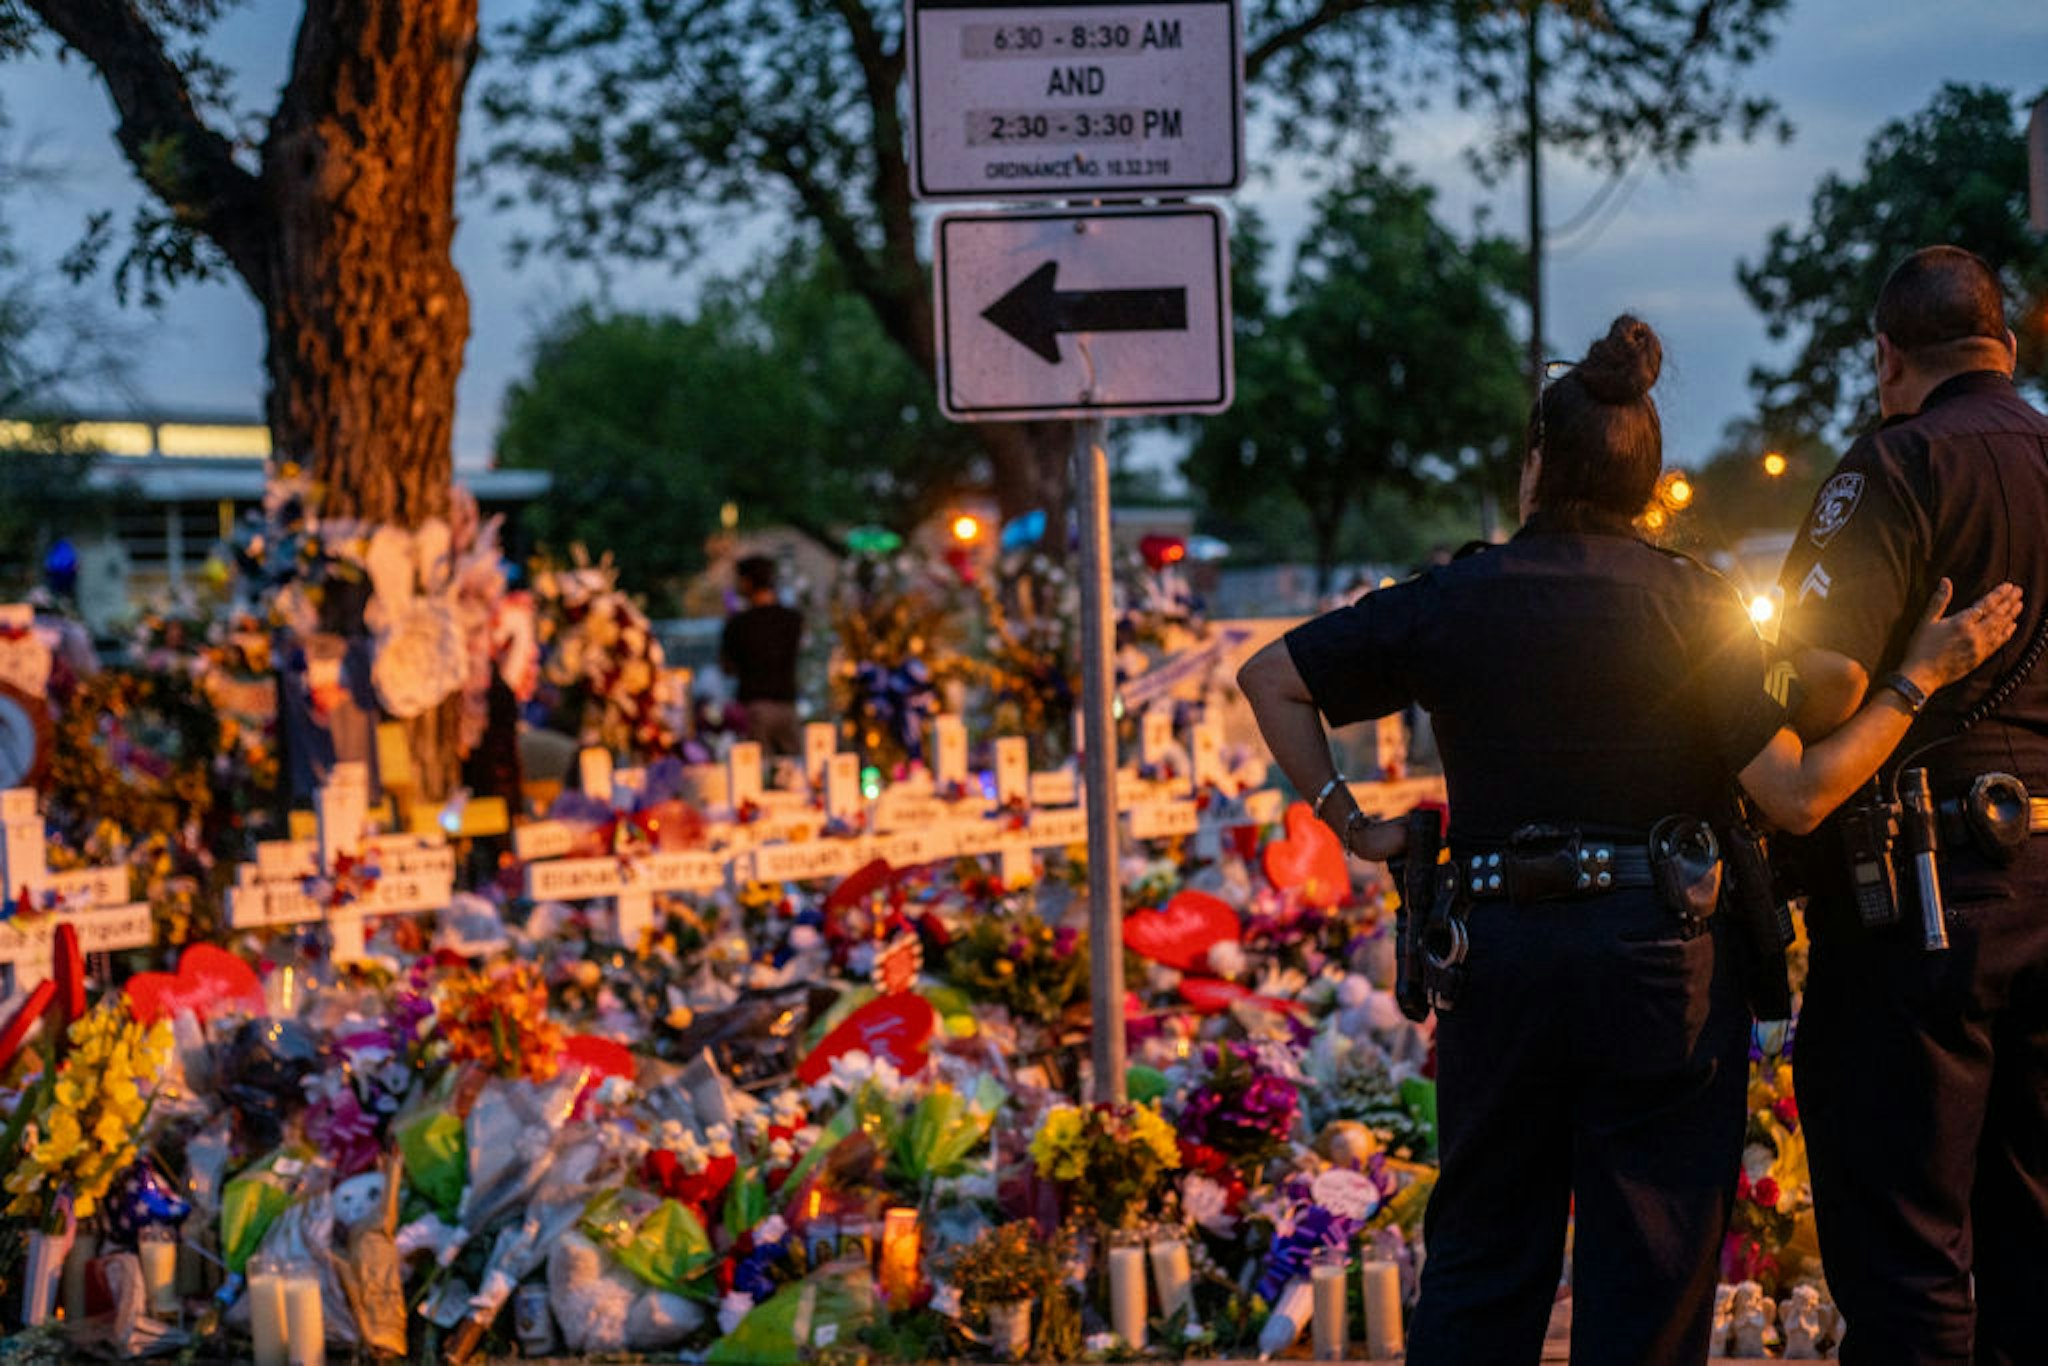 UVALDE, TEXAS - MAY 31: Police officers stand together at a memorial dedicated to the 19 children and two adults killed on May 24th during the mass shooting at Robb Elementary School on May 31, 2022 in Uvalde, Texas. Opening wakes and funerals for the 21 victims will be scheduled throughout the week.